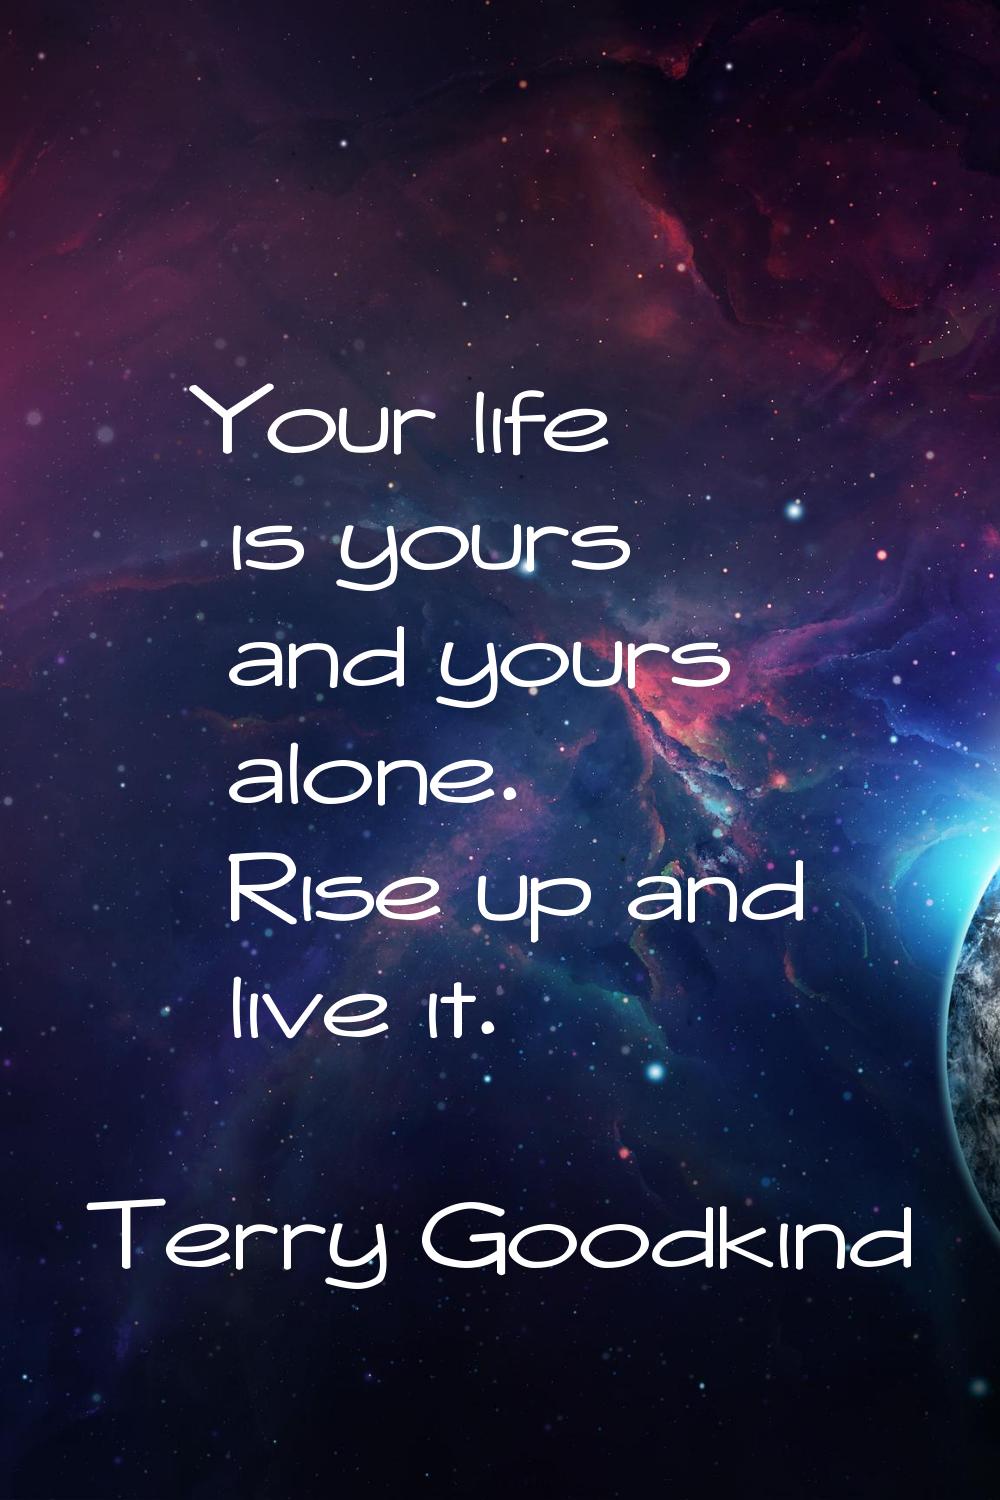 Your life is yours and yours alone. Rise up and live it.